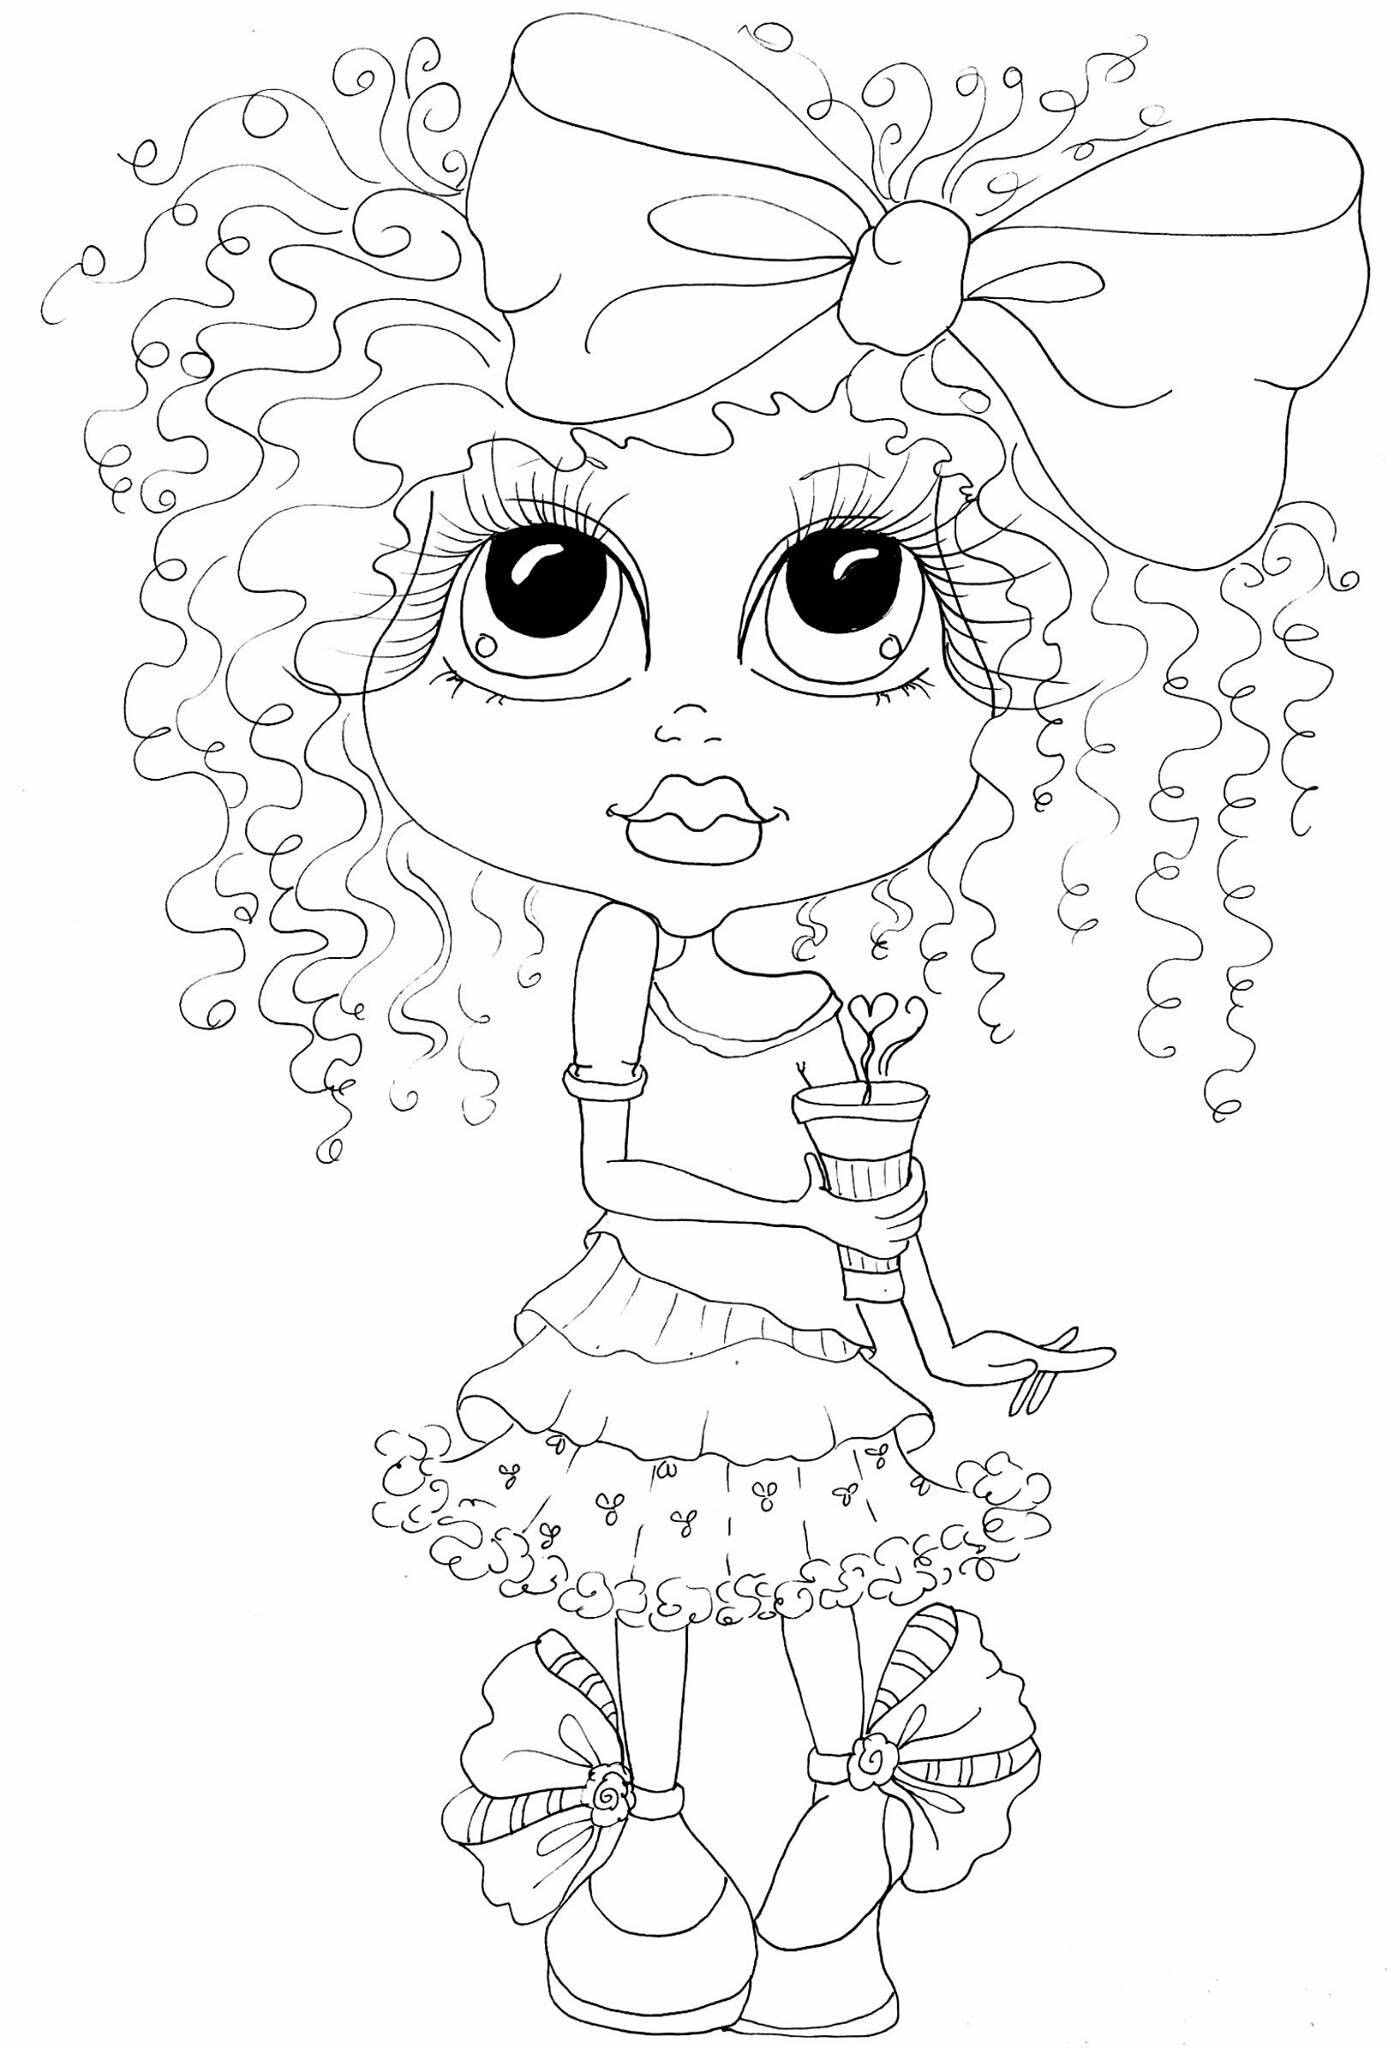 Big Eye Kids Coloring Page Ideas. Coloring Page, Coloring Books, Big